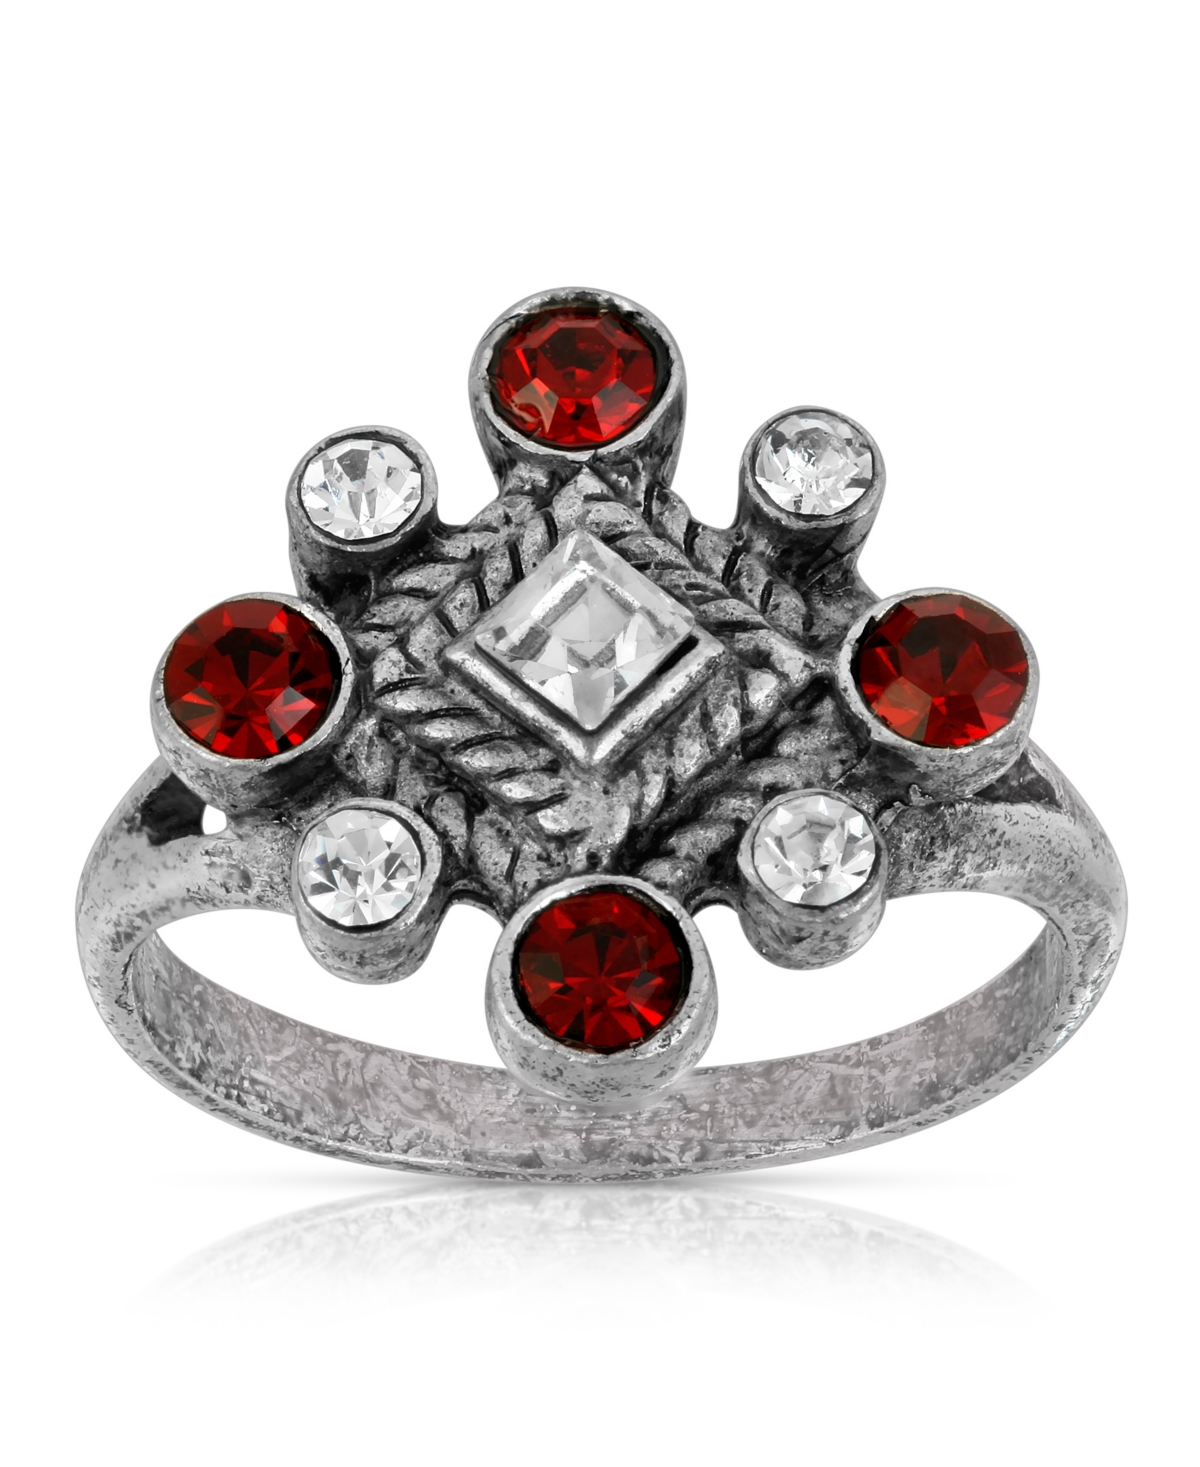 2028 Pewter Crystal Diamond Shaped Ring In Red